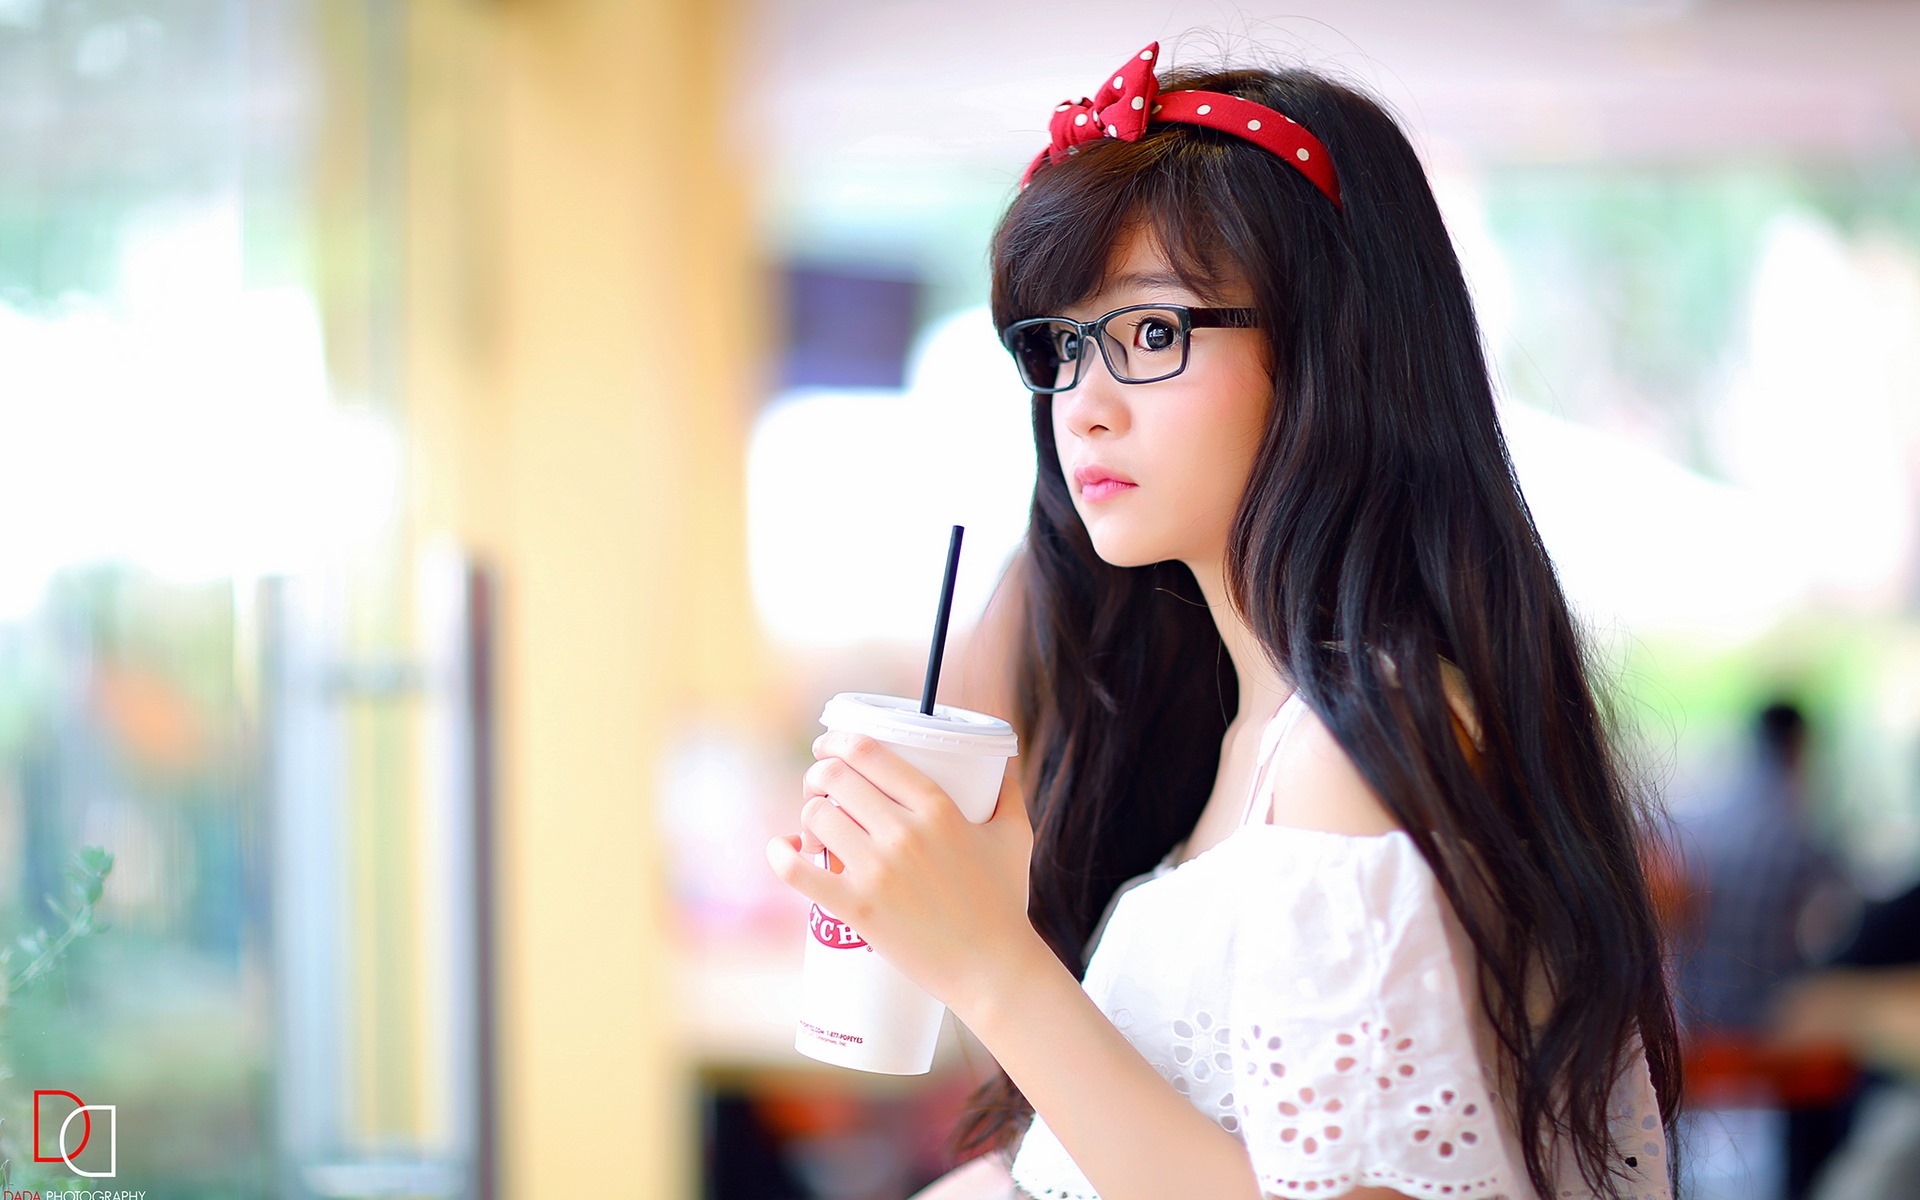 Pure and lovely young Asian girl HD wallpapers collection (3) #32 - 1920x1200